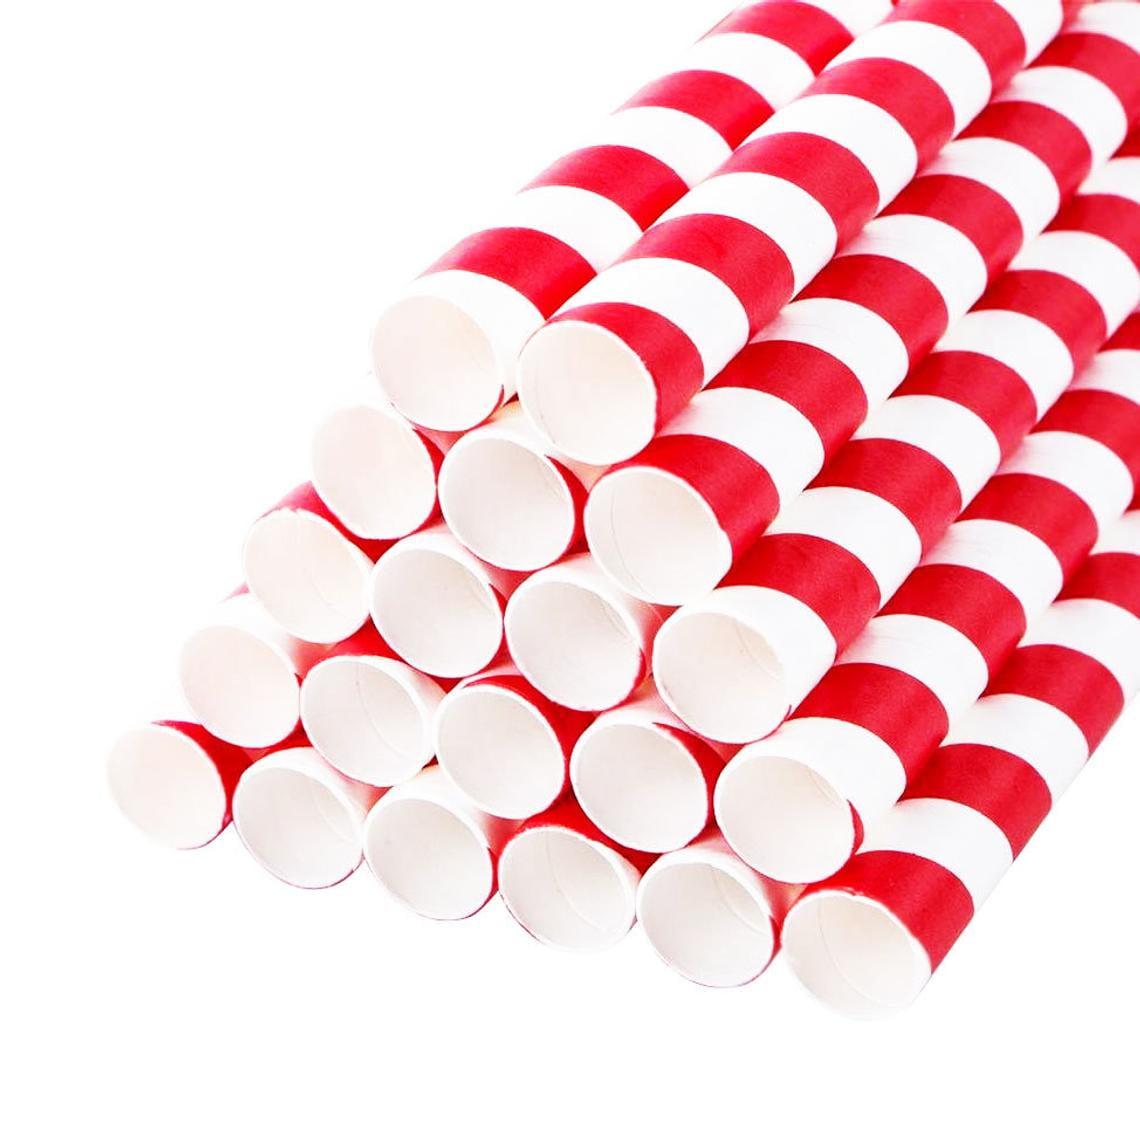 Cherry Pattern Paper Straws - Red White Green - Stripe Paper Straws - 100  Pack Outside the Box Papers